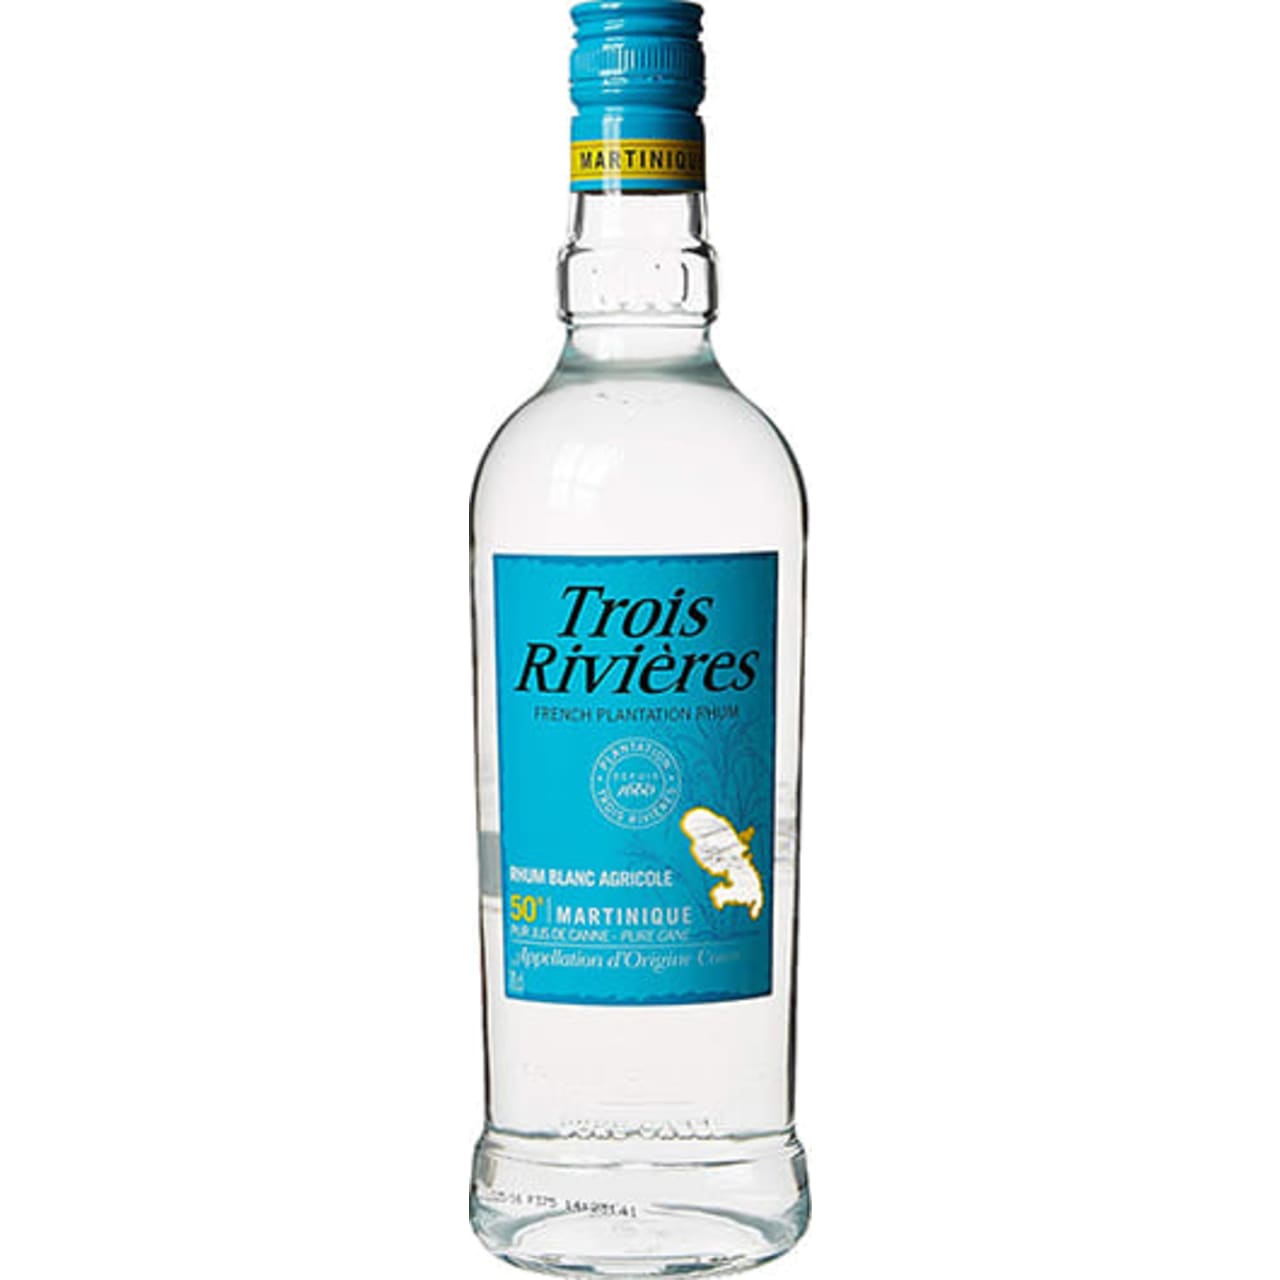 A traditional rum Agricole from Martinique, Trois Rivières Blanc has a clean, grassy character.